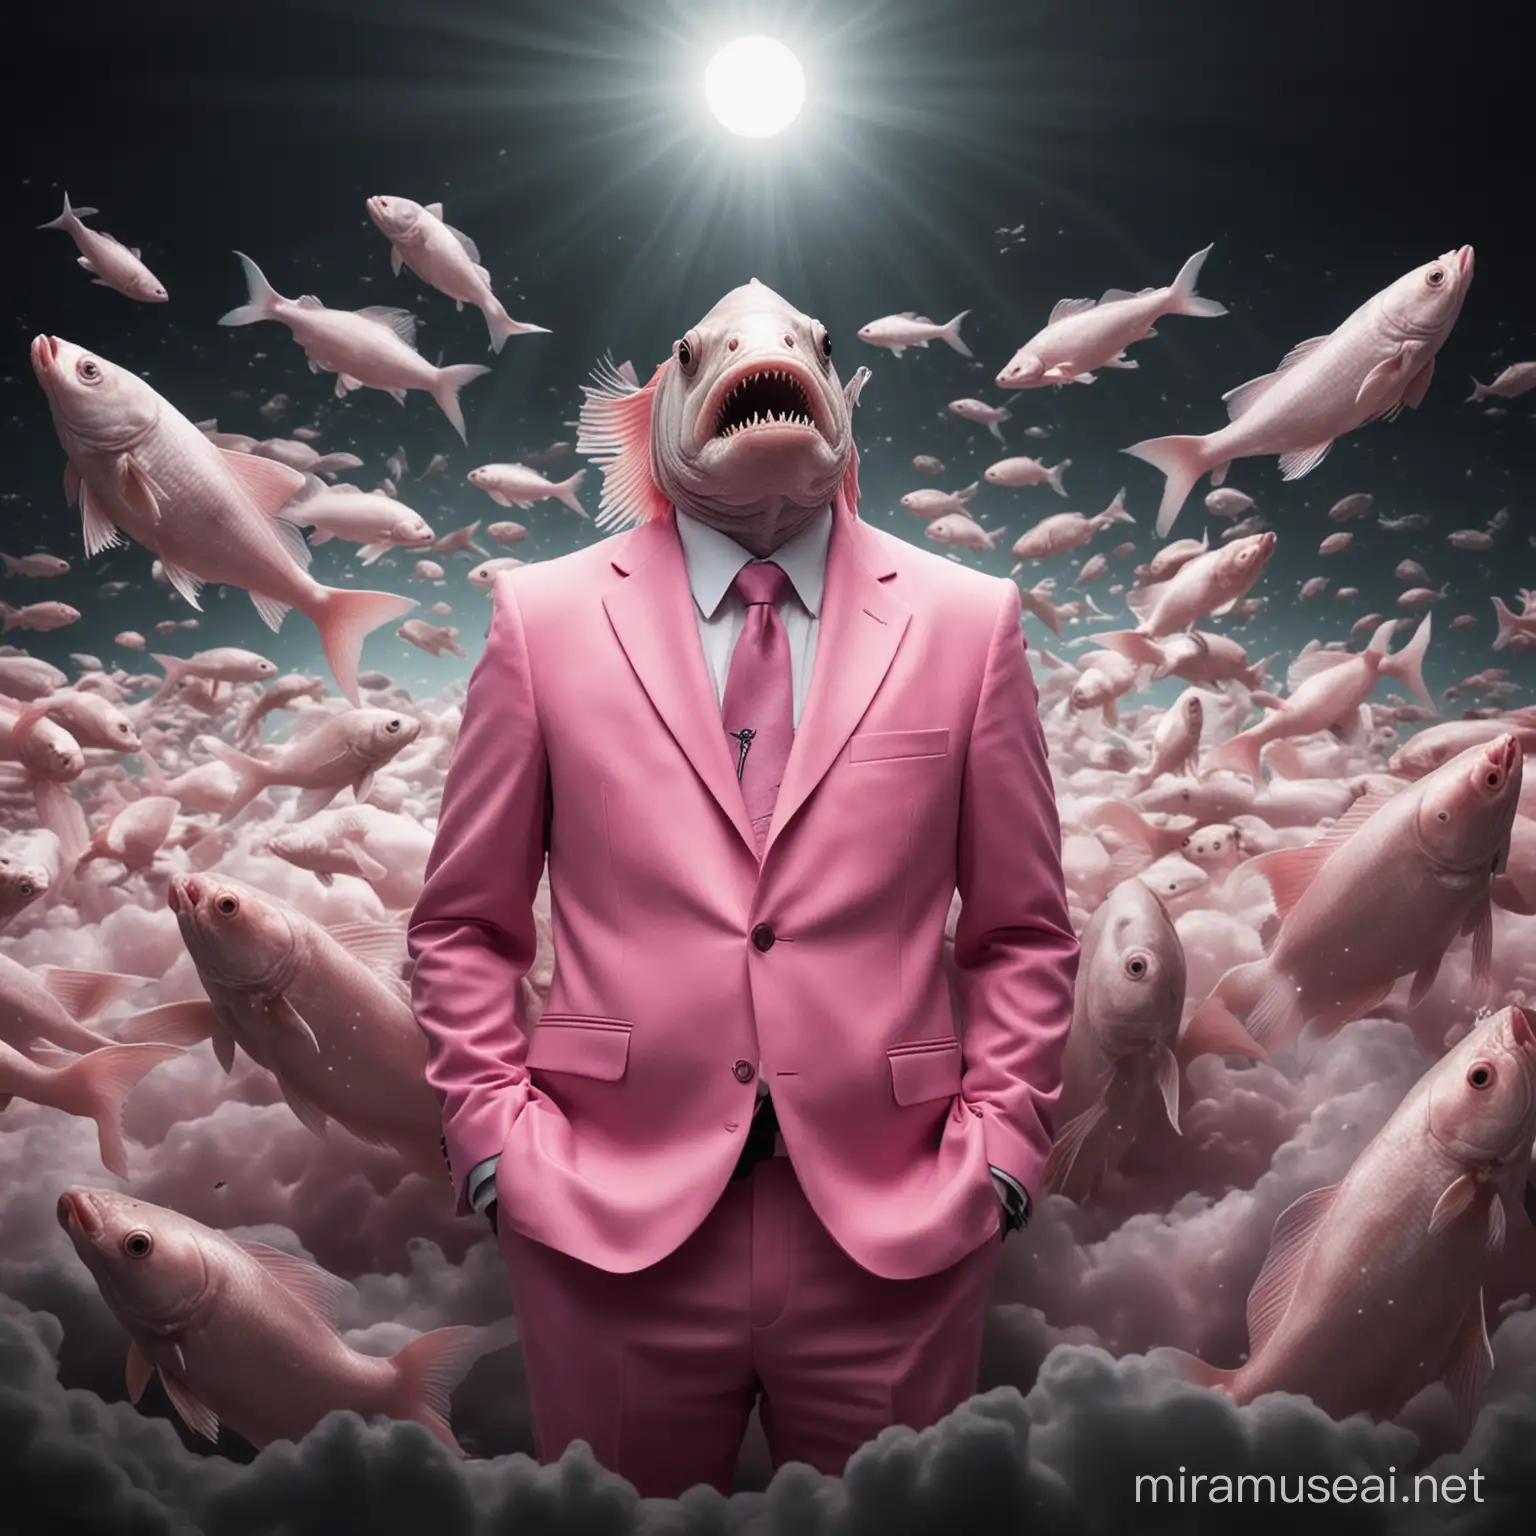 dead fish on the dark side in a pink suit in heaven